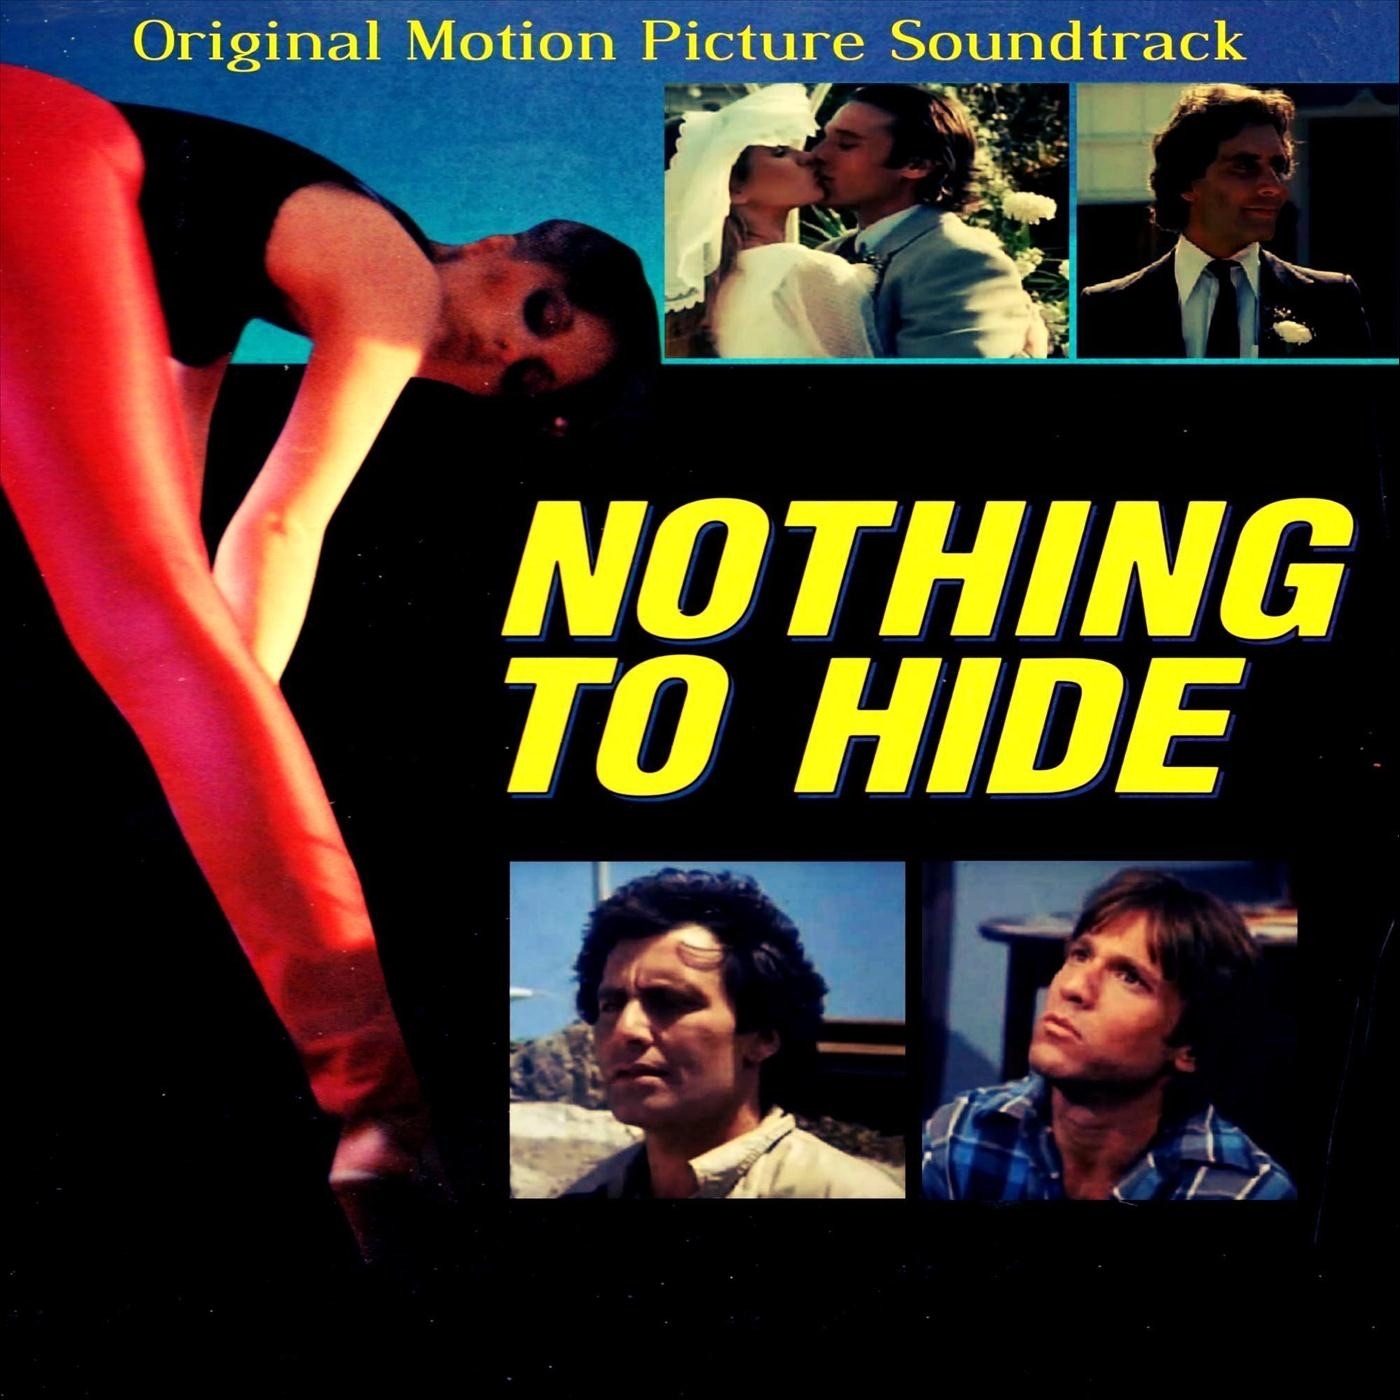 Nothing to hide 1981